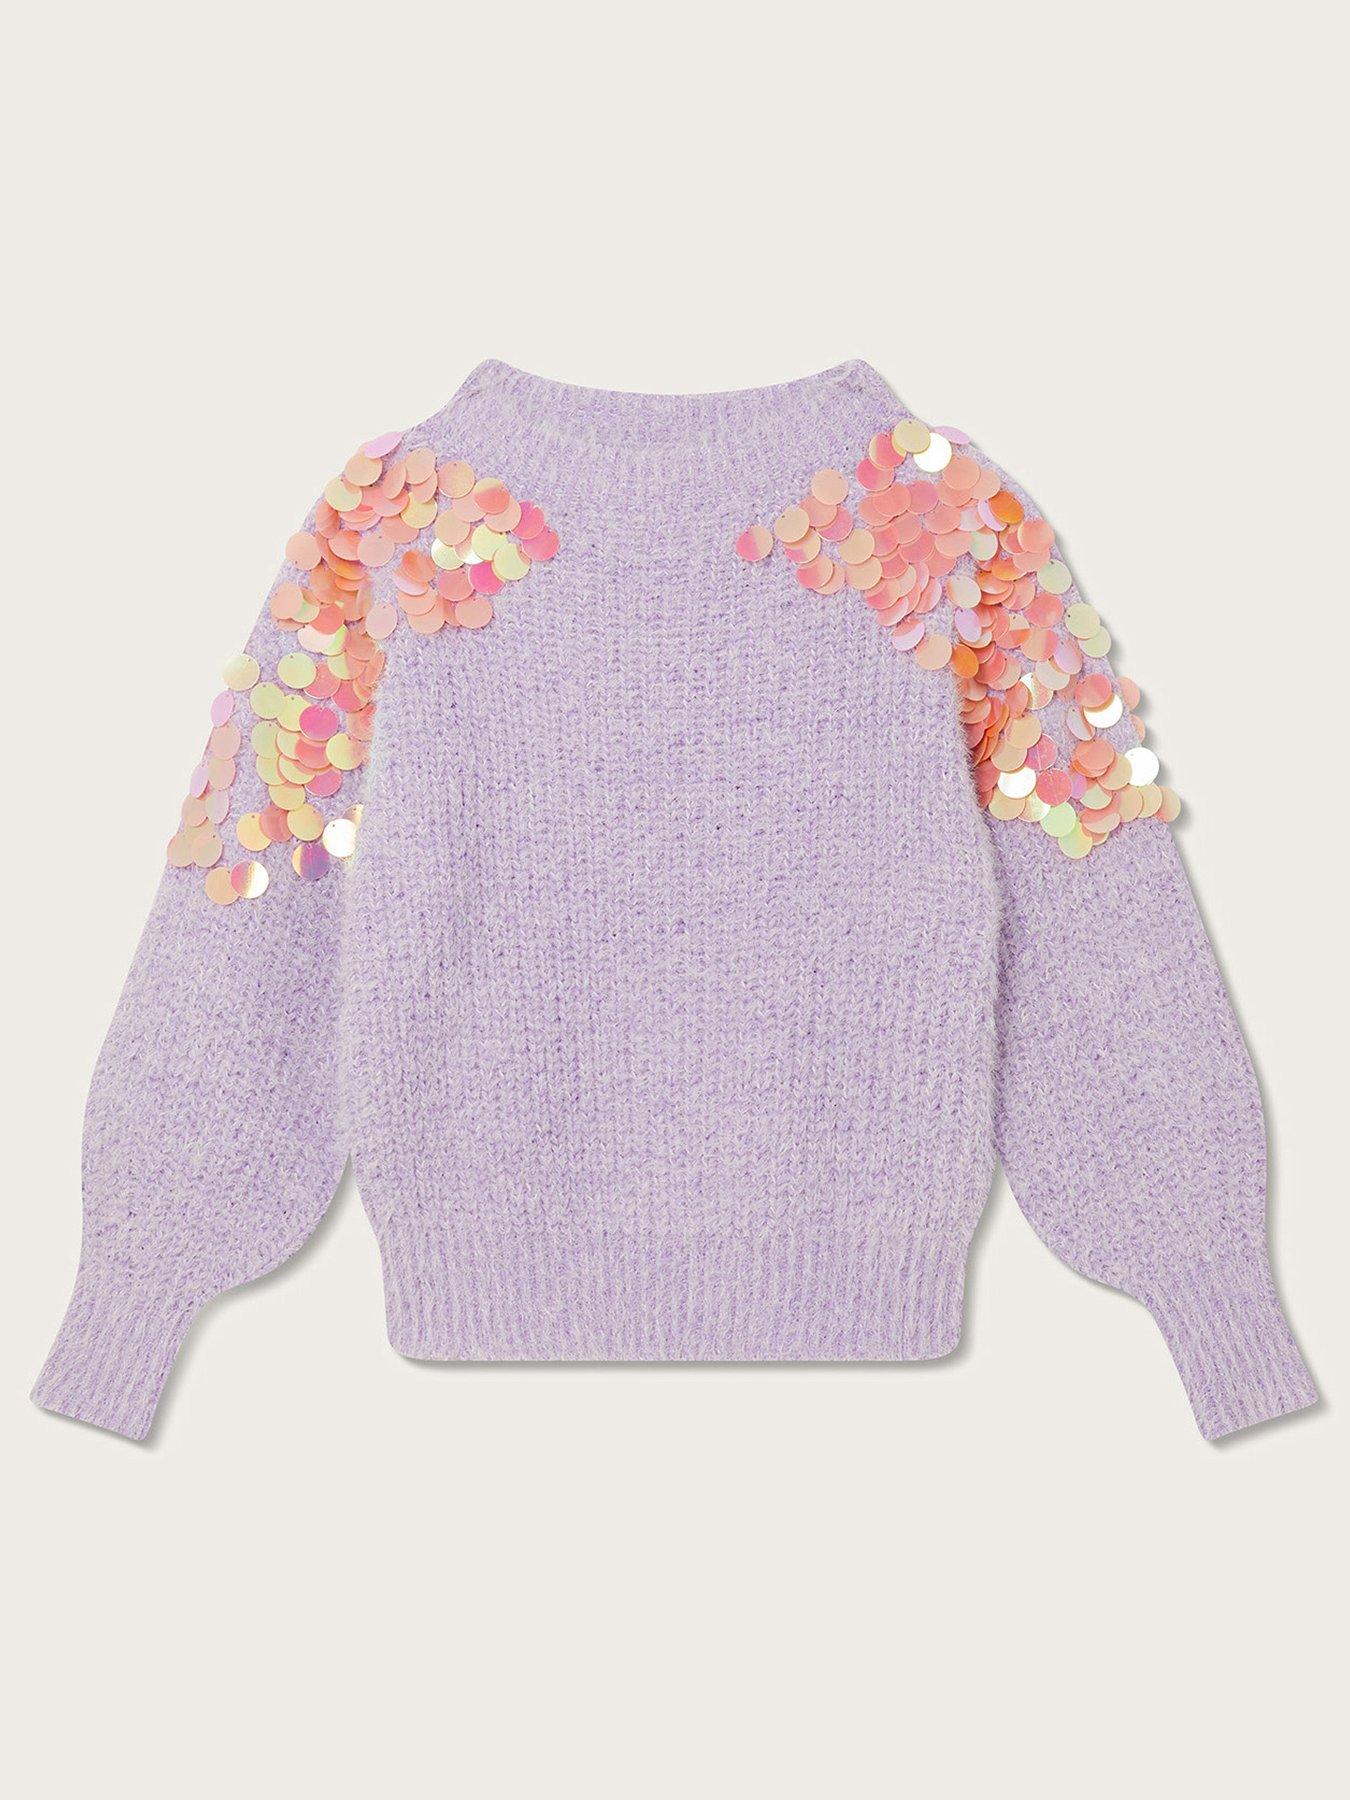 Monsoon Girls Sequin Sleeve Jumper - Lilac | very.co.uk